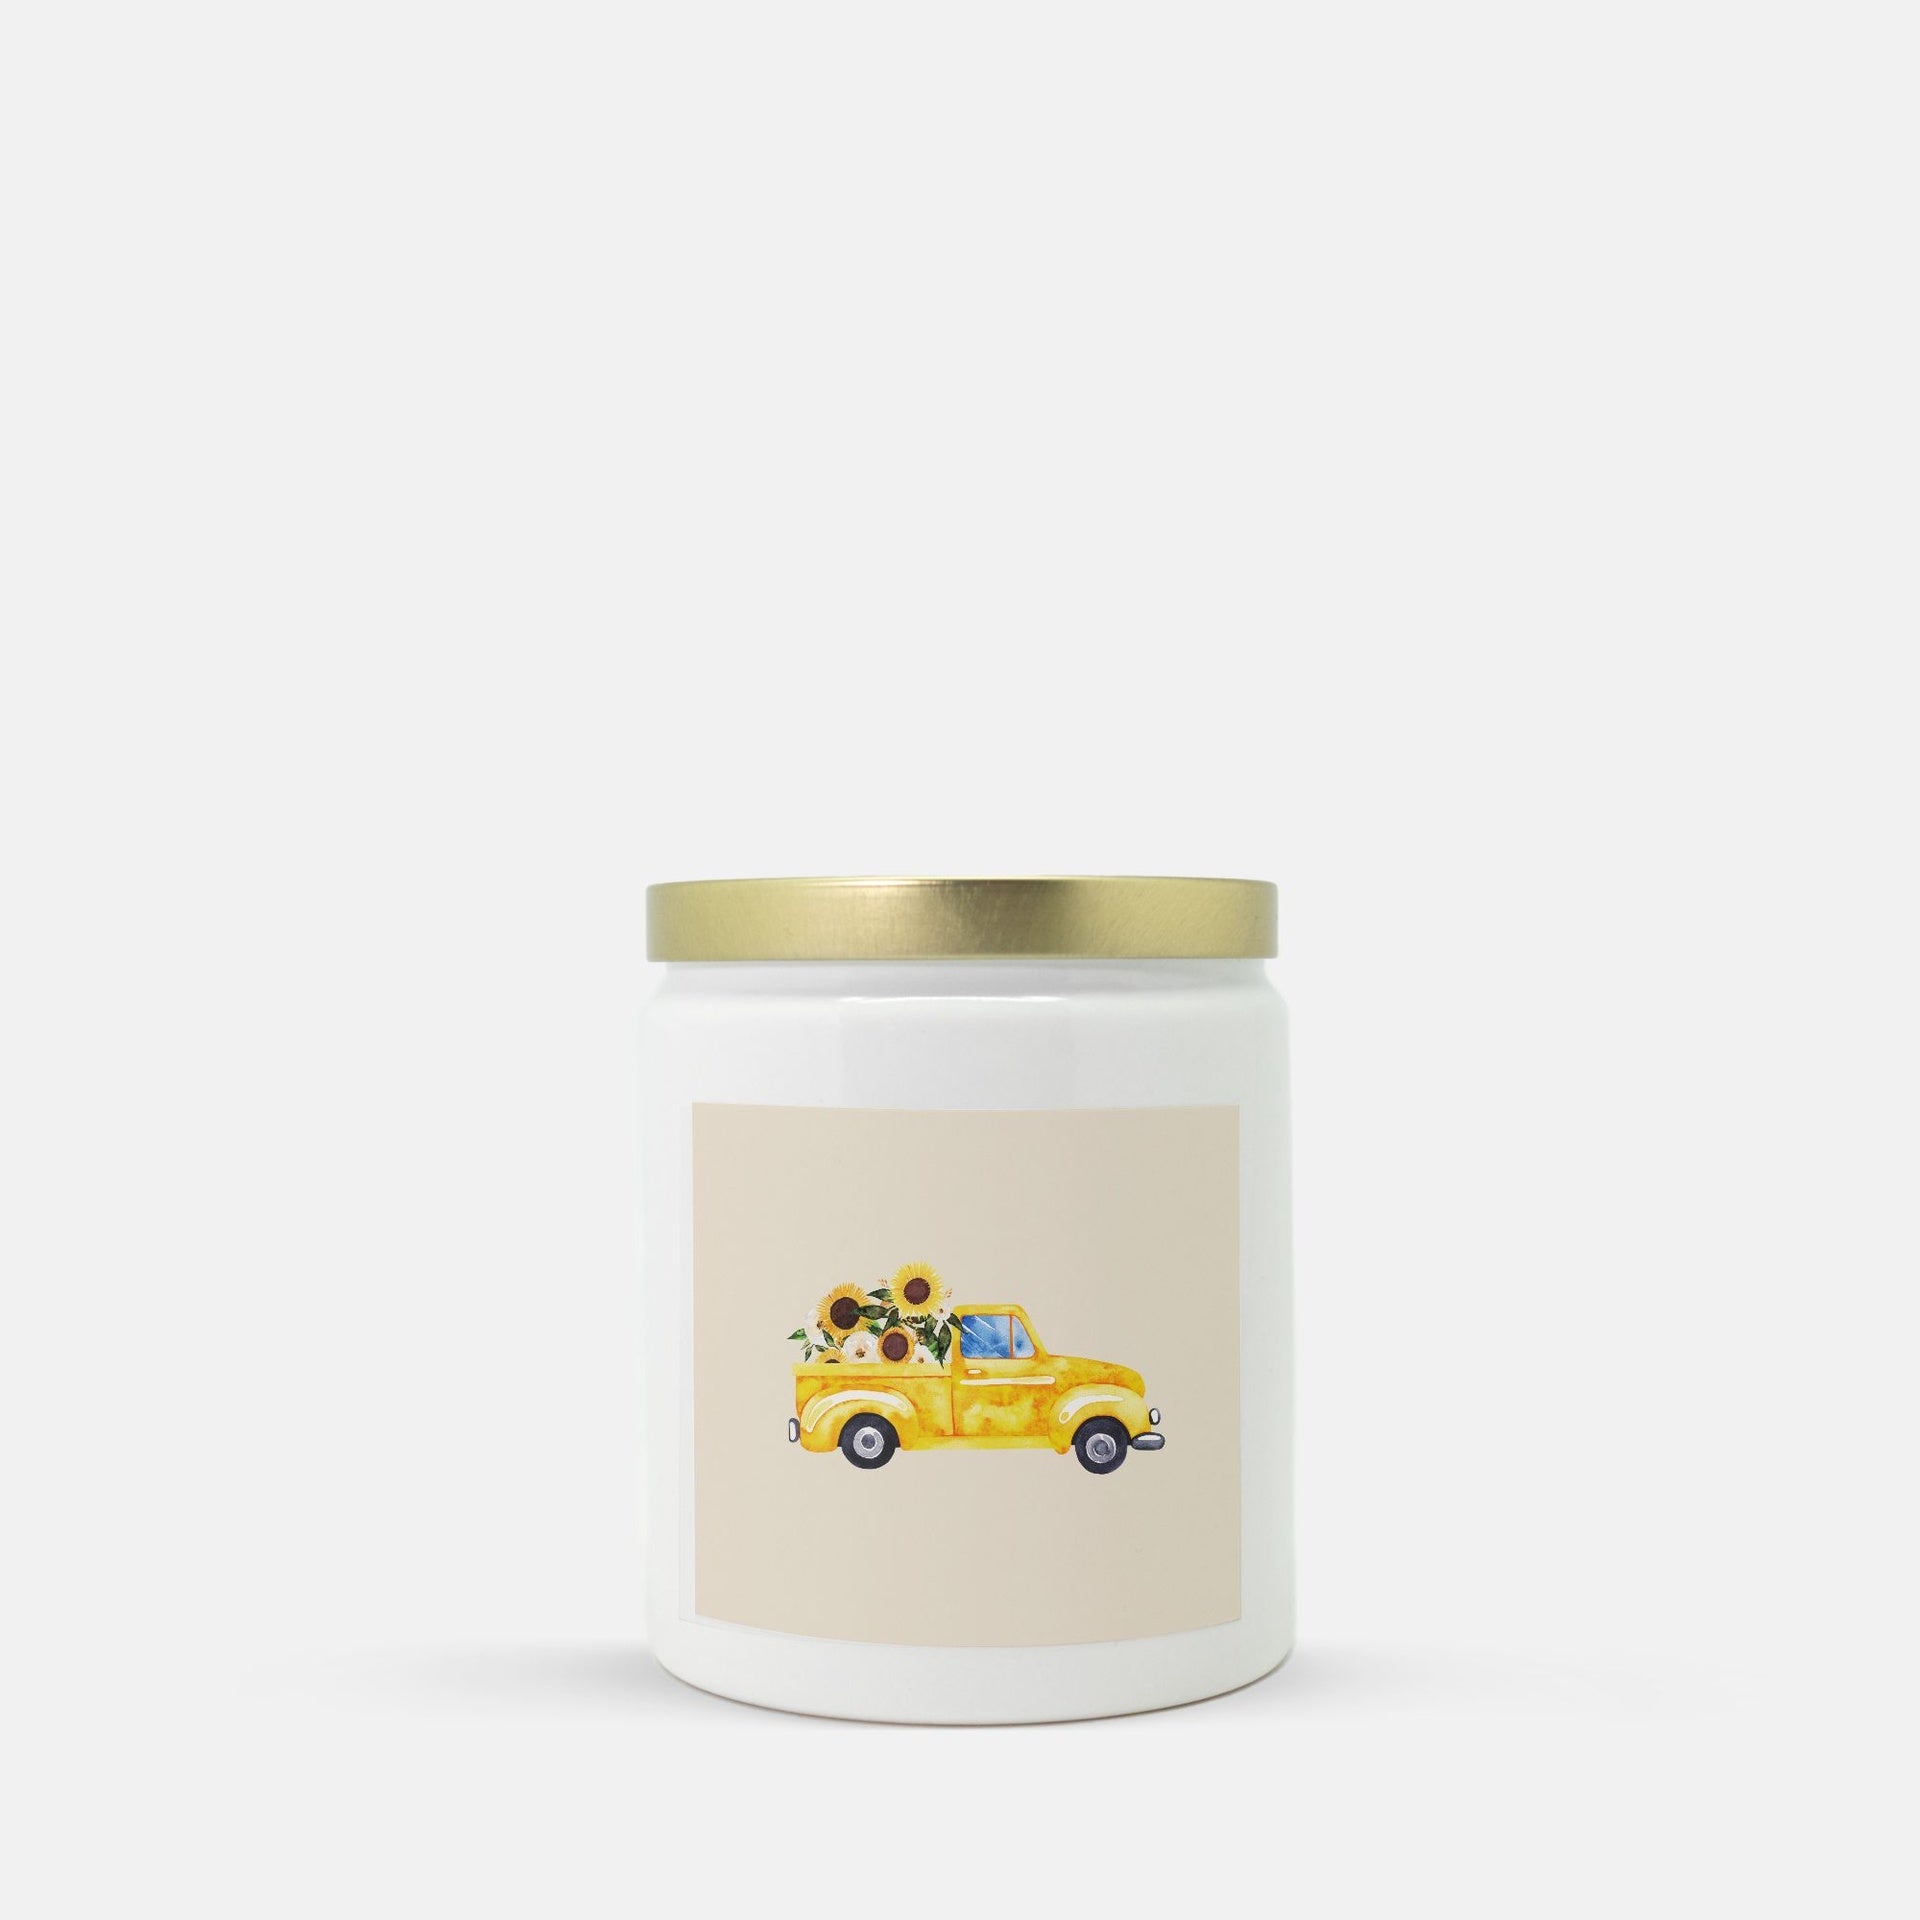 Lifestyle Details - Yellow Rustic Truck Ceramic Candle w Gold Lid - Vanilla Bean